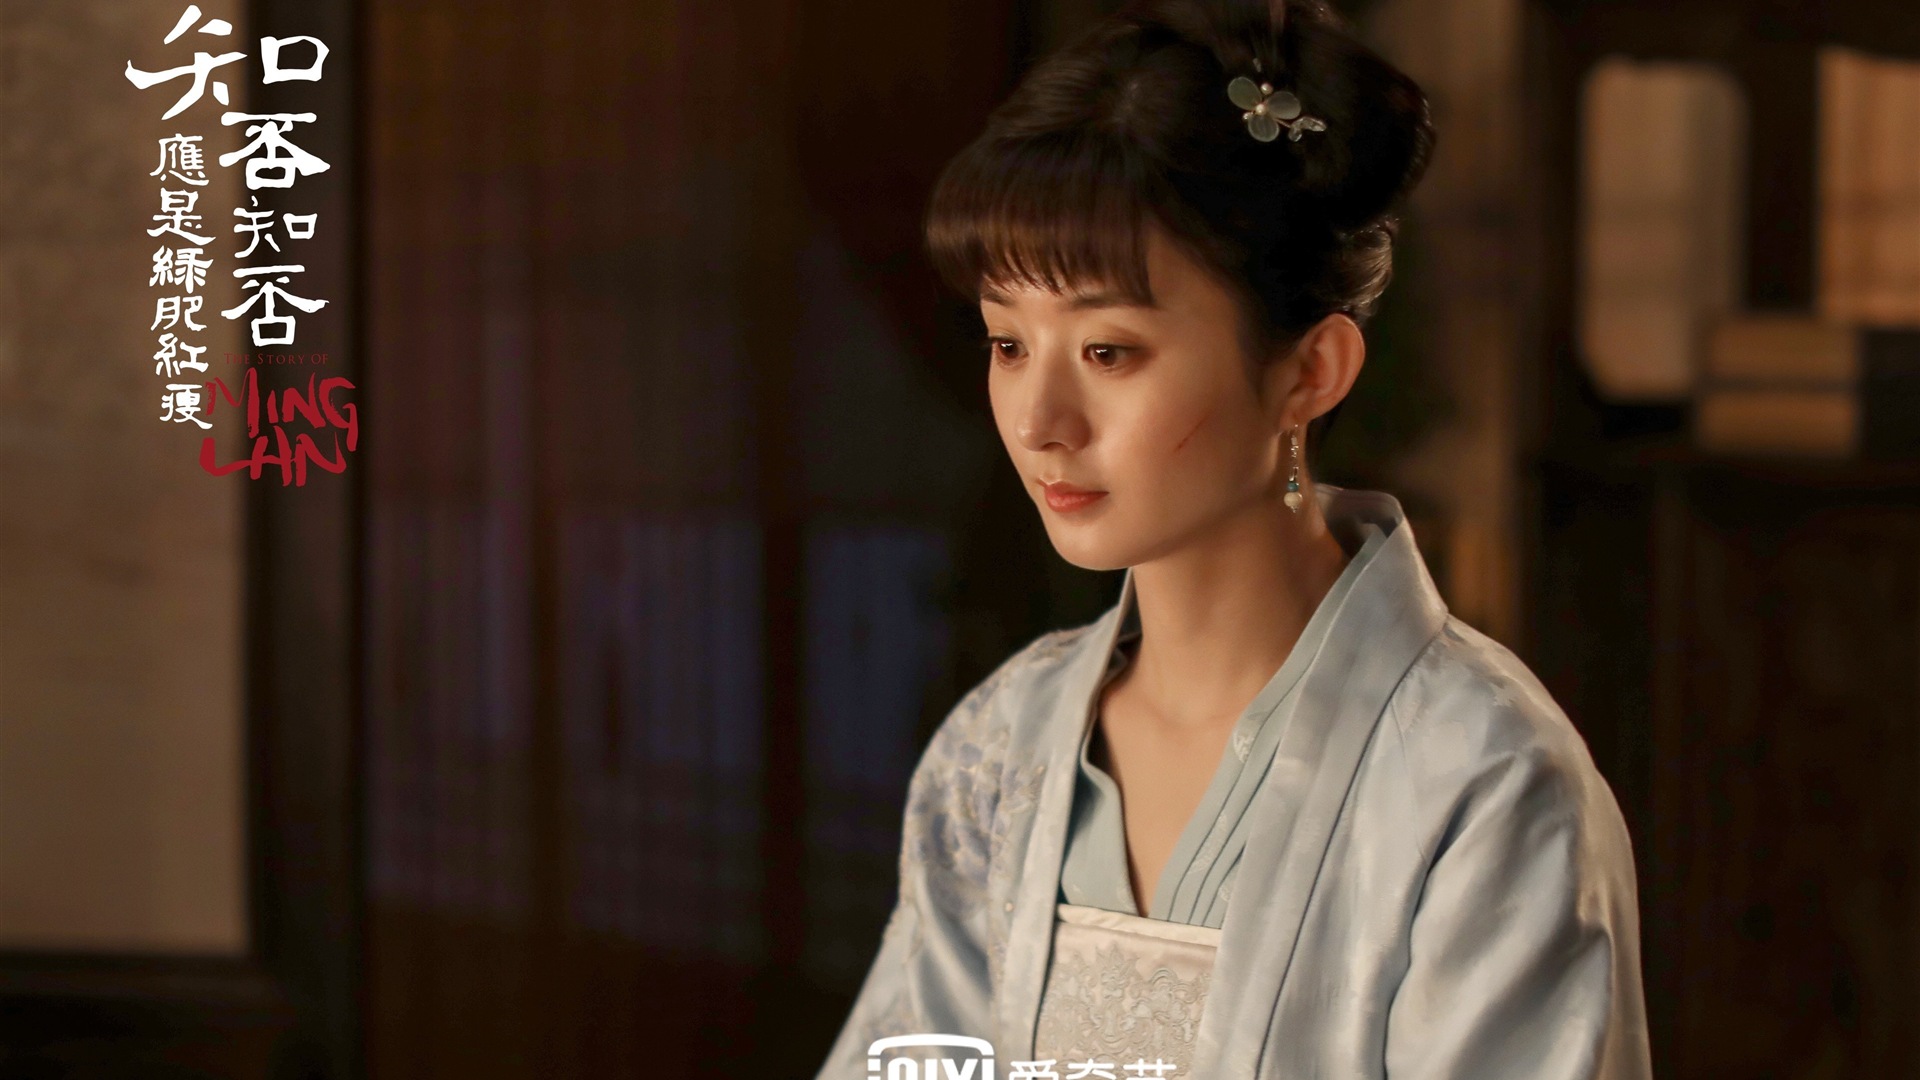 The Story Of MingLan, TV series HD wallpapers #36 - 1920x1080